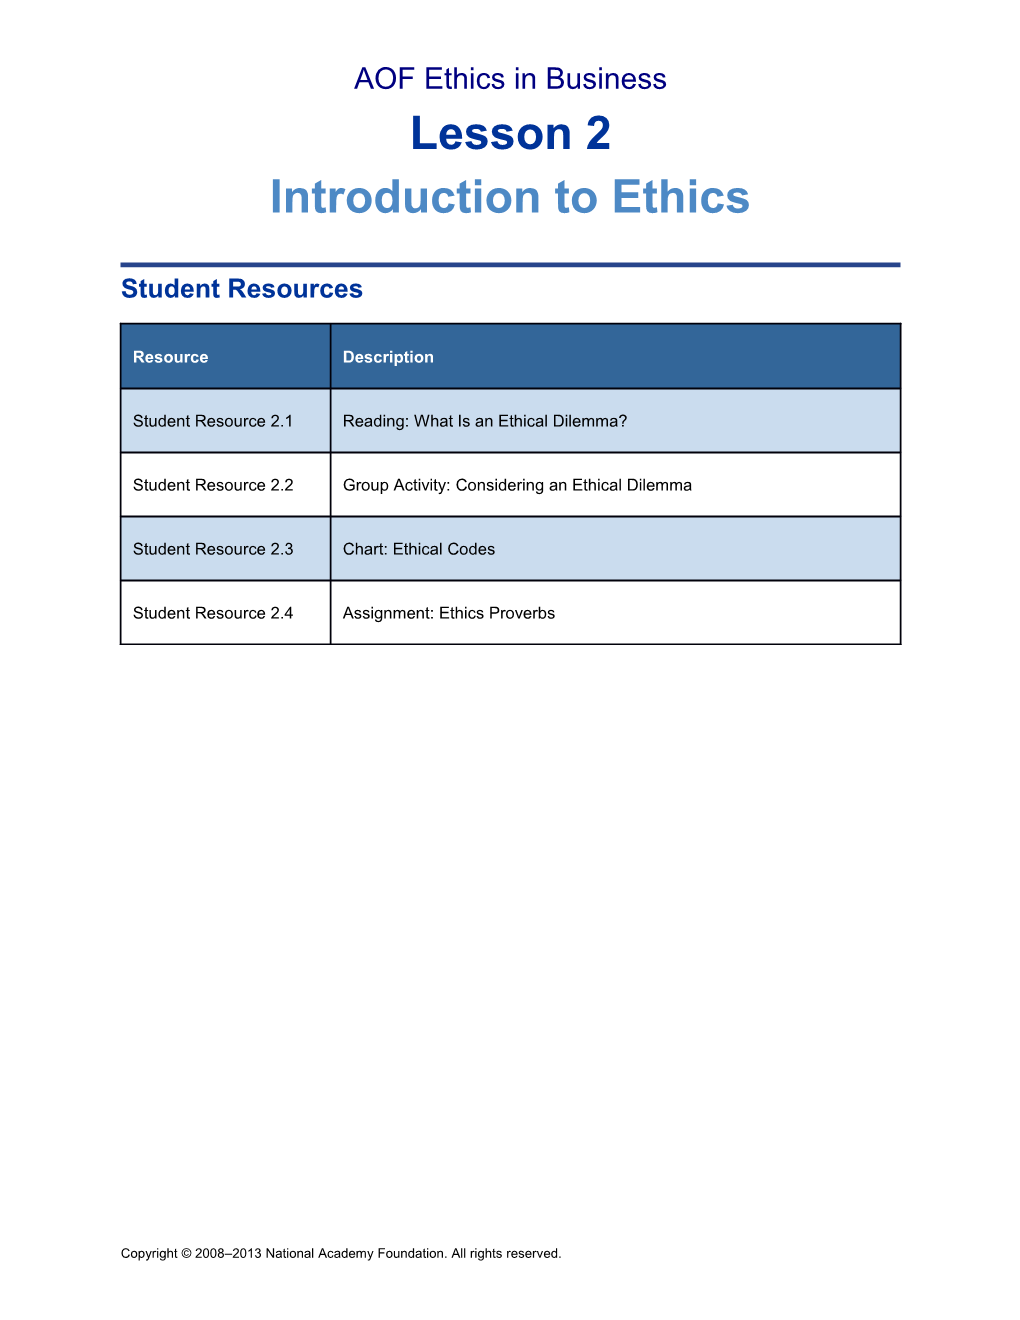 AOF Ethics in Business